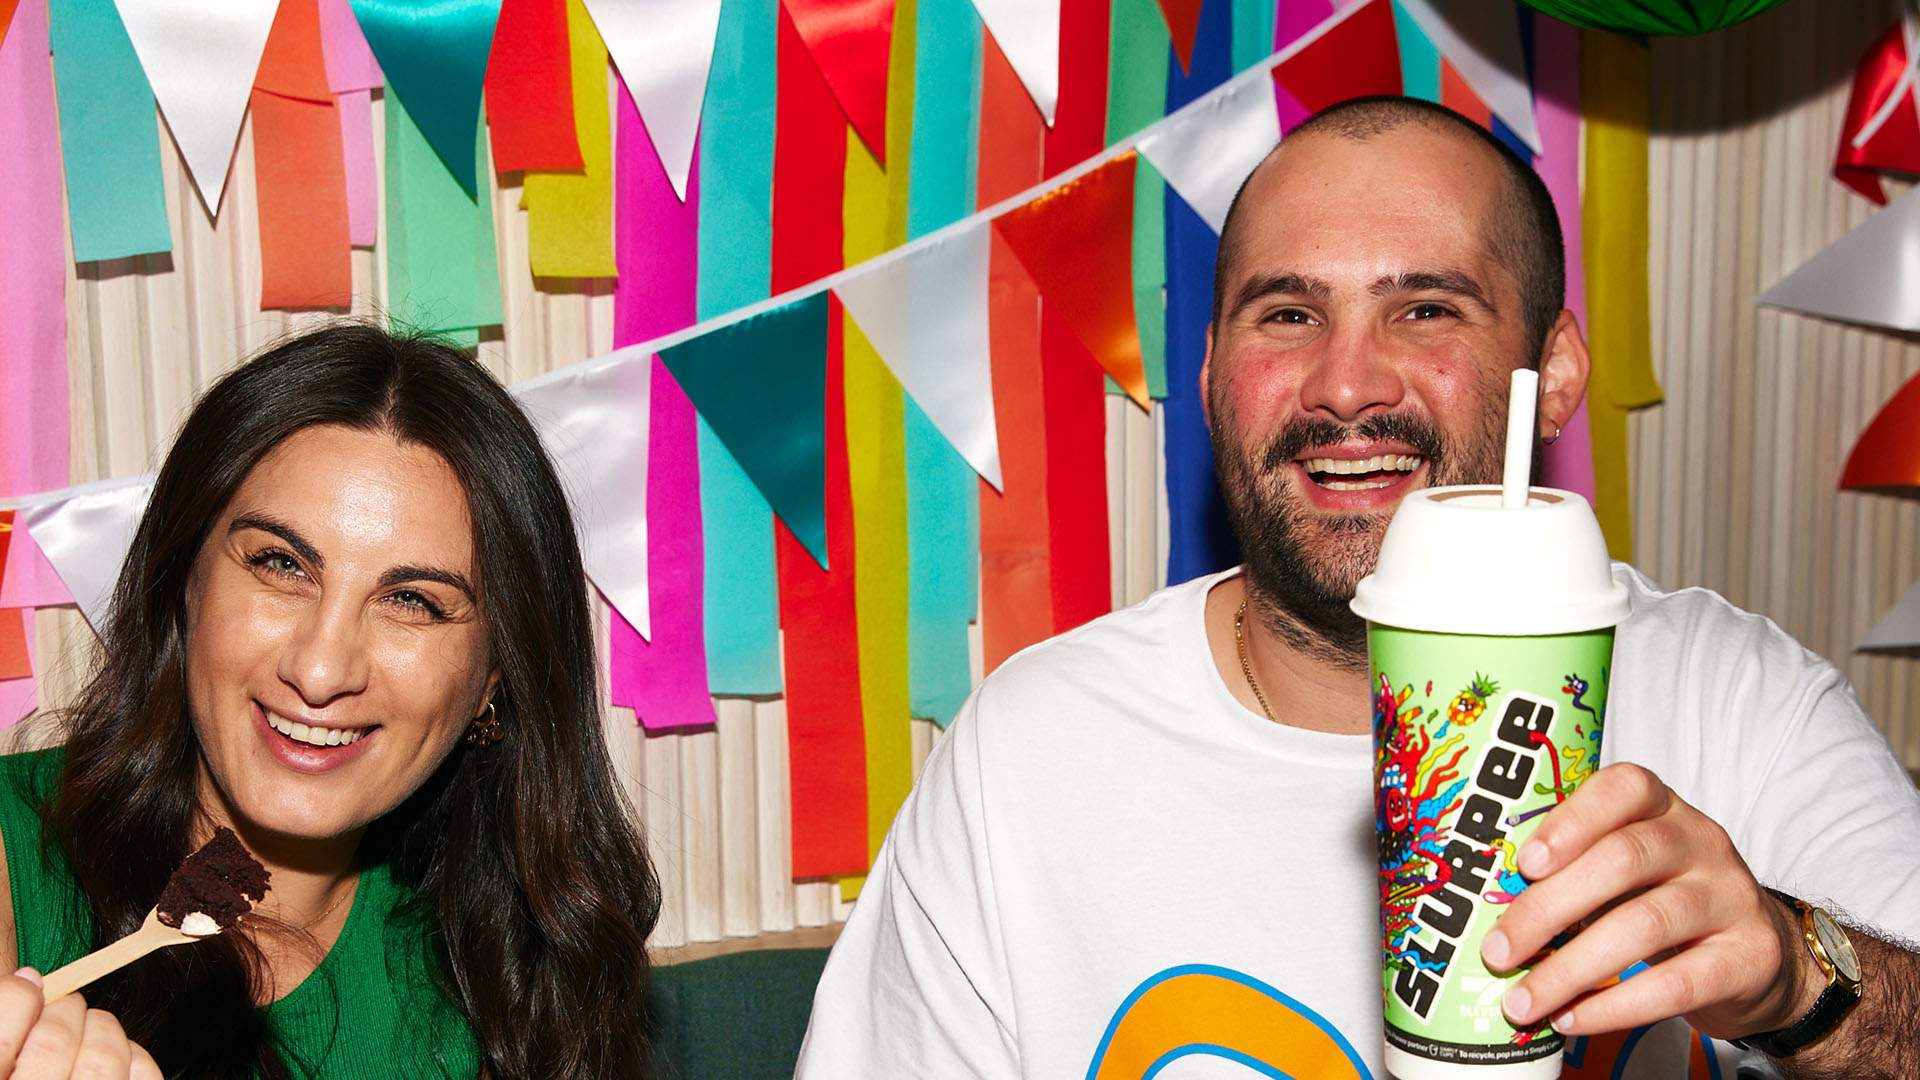 Free Coffees and Slurpees for 7-Eleven Day